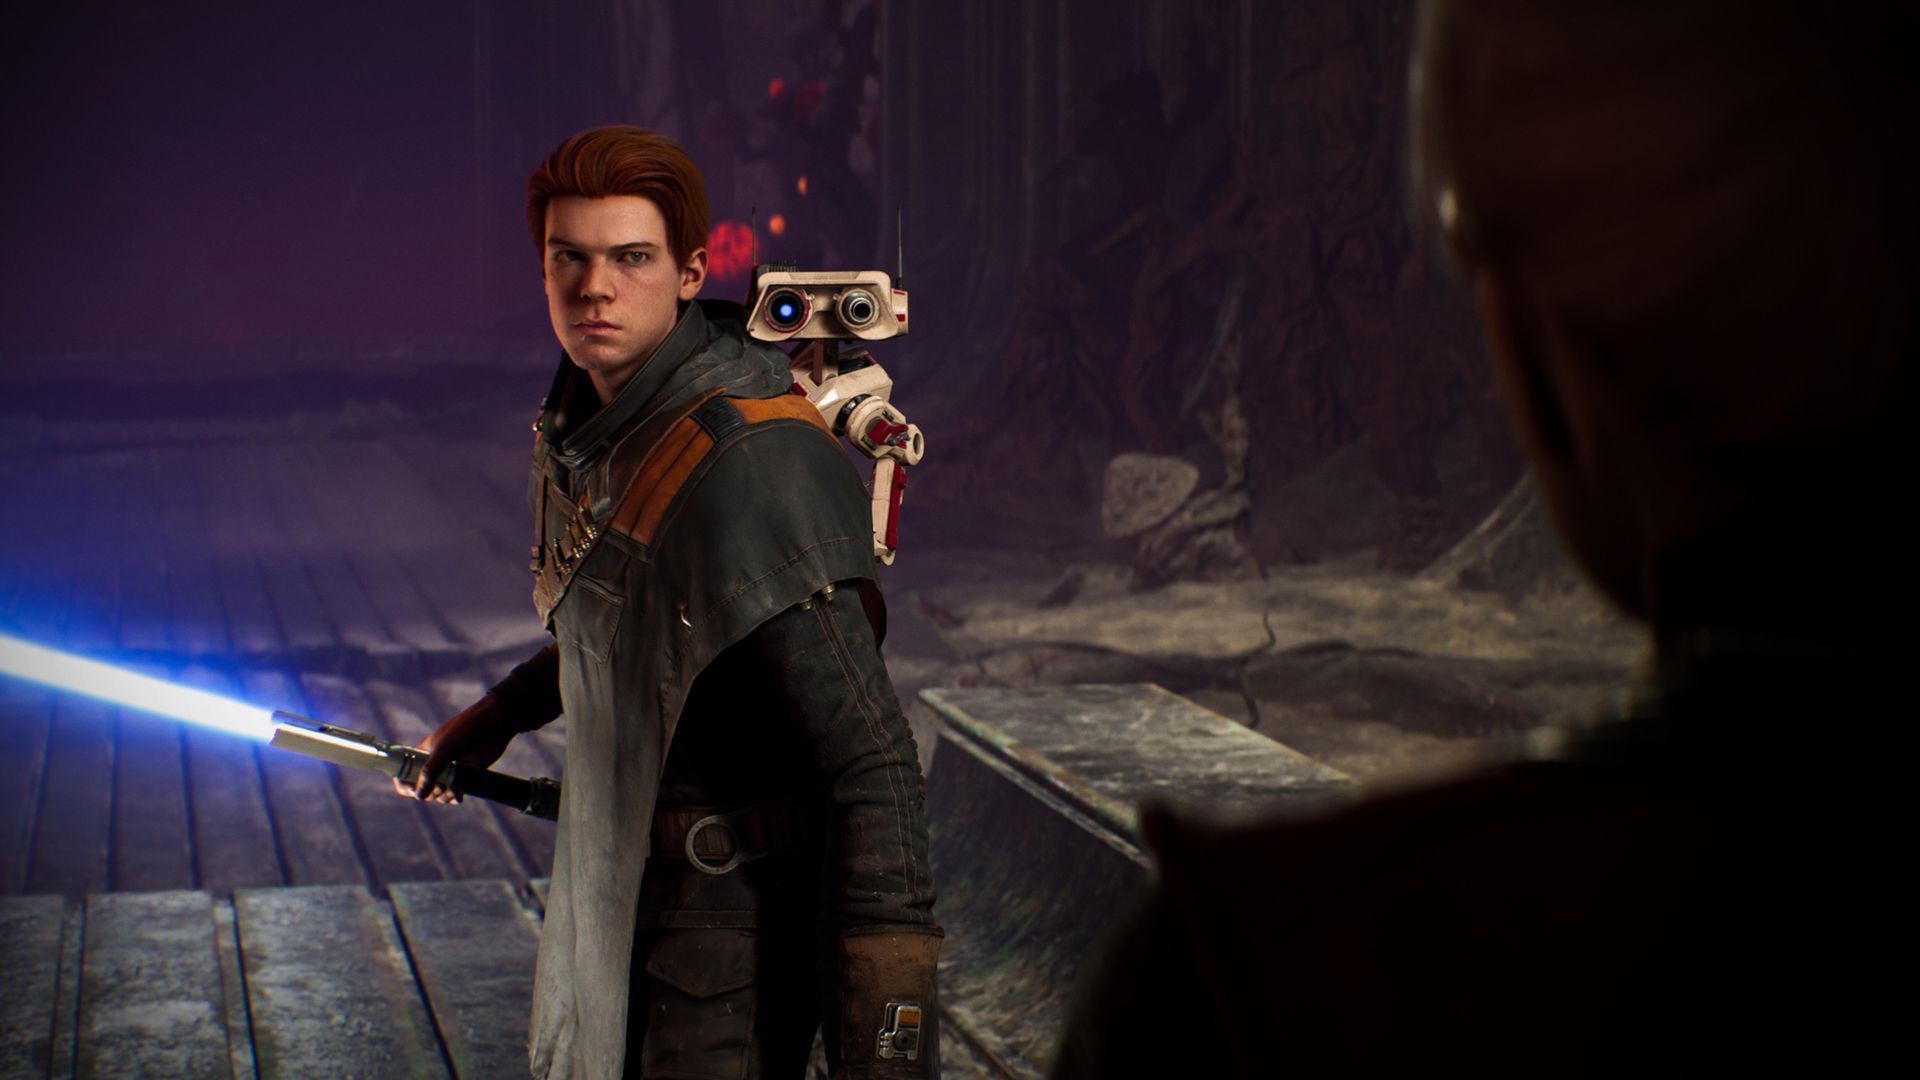 Image of an animated video game scene showing a redheaded Jedi wielding a lightsaber and carrying a small robot on their back